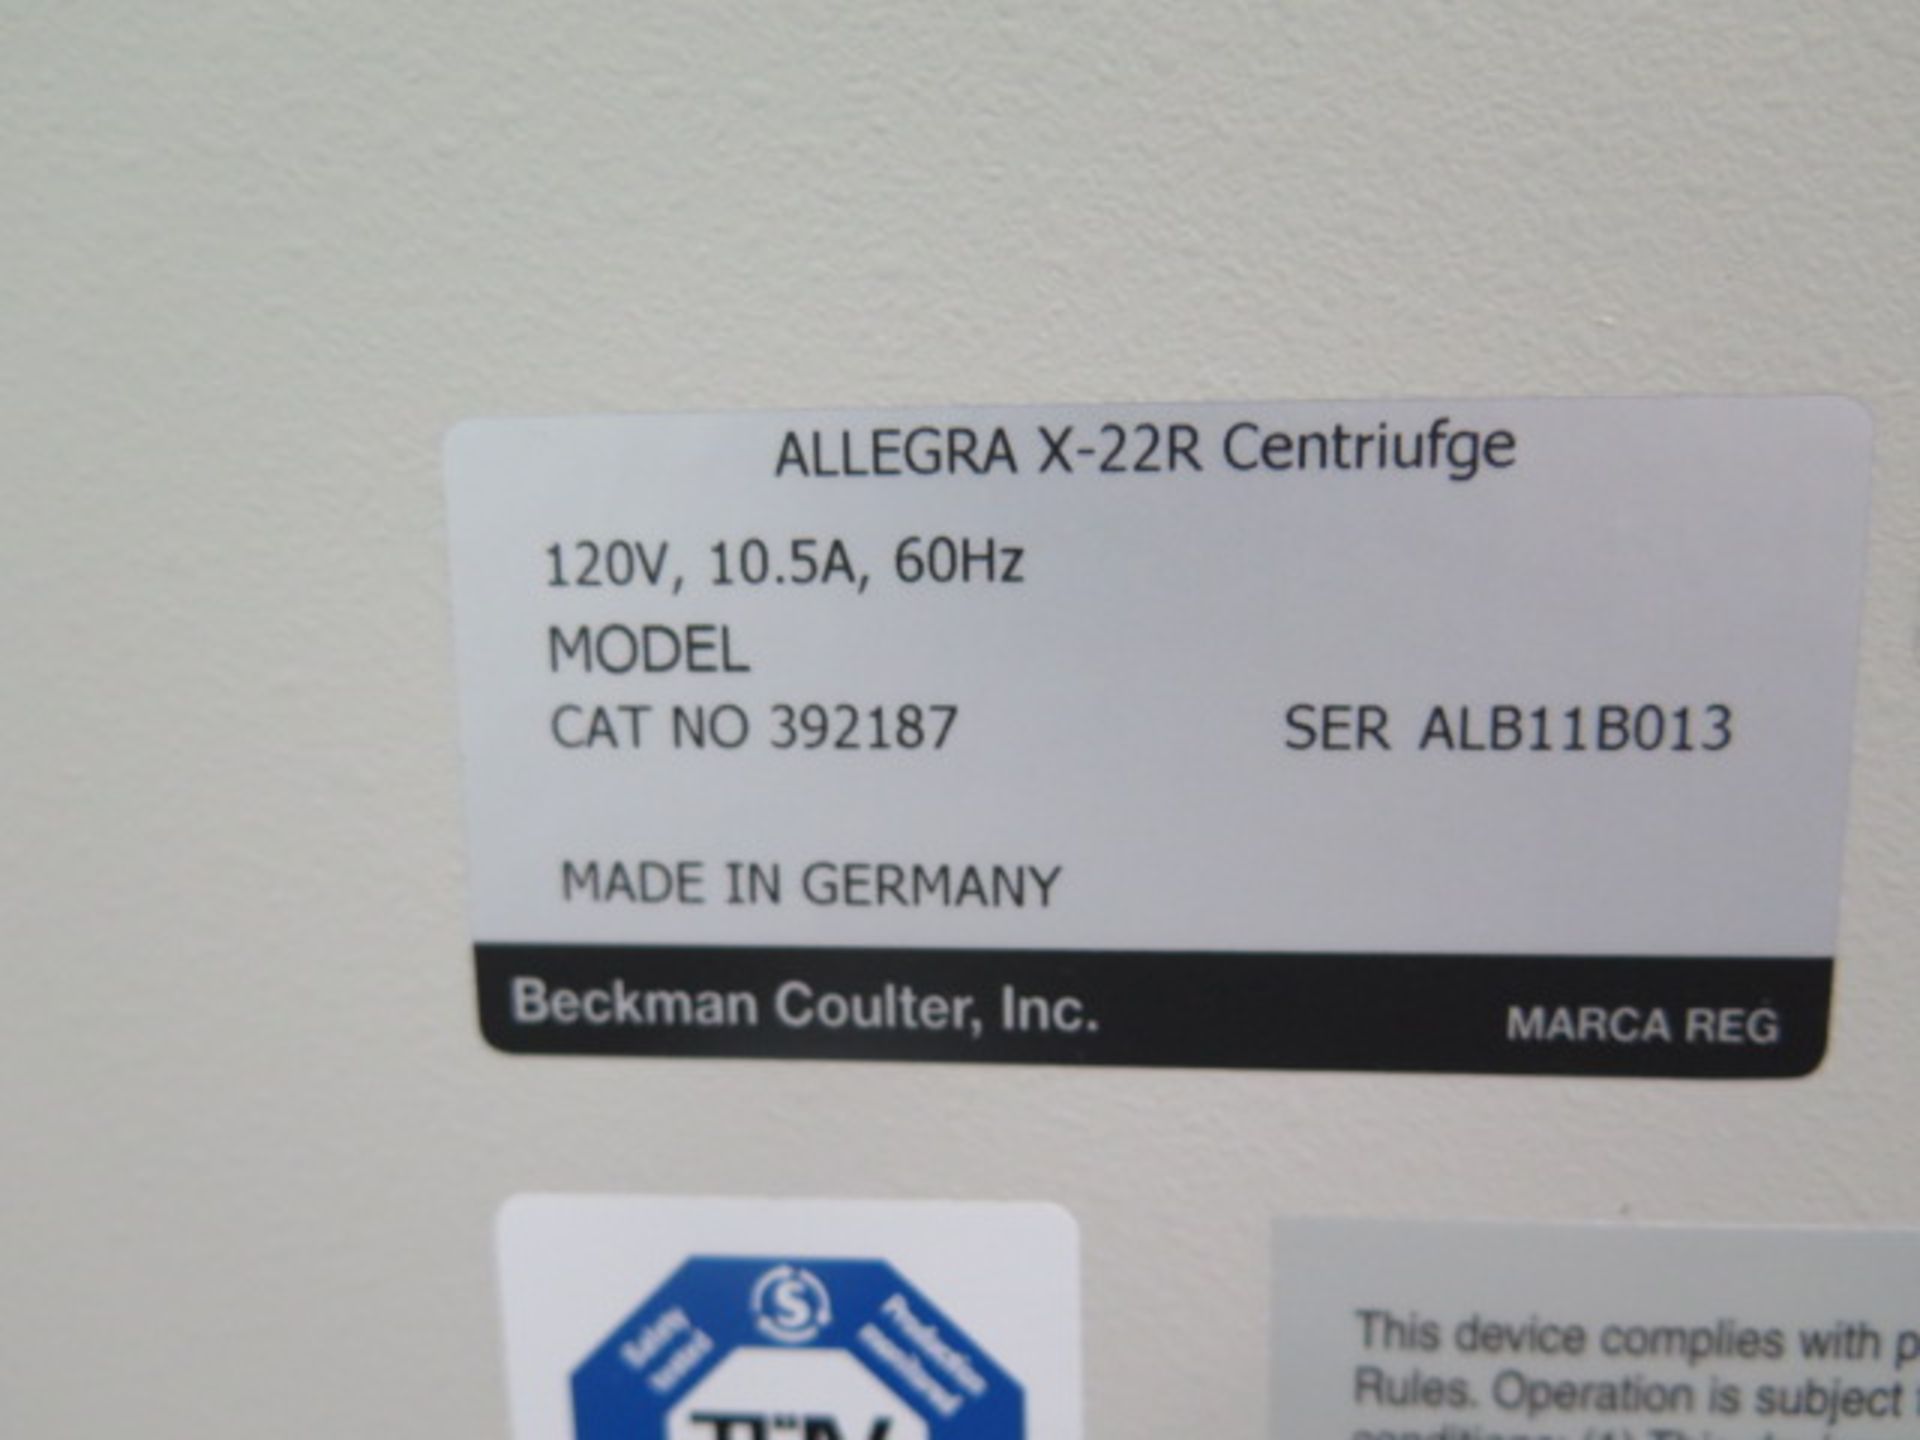 Beckman Coulter Allegra X-22R Centrifuge s/n ALB11B013 (SOLD AS-IS - NO WARRANTY) (SOLD AS-IS - NO - Image 9 of 9